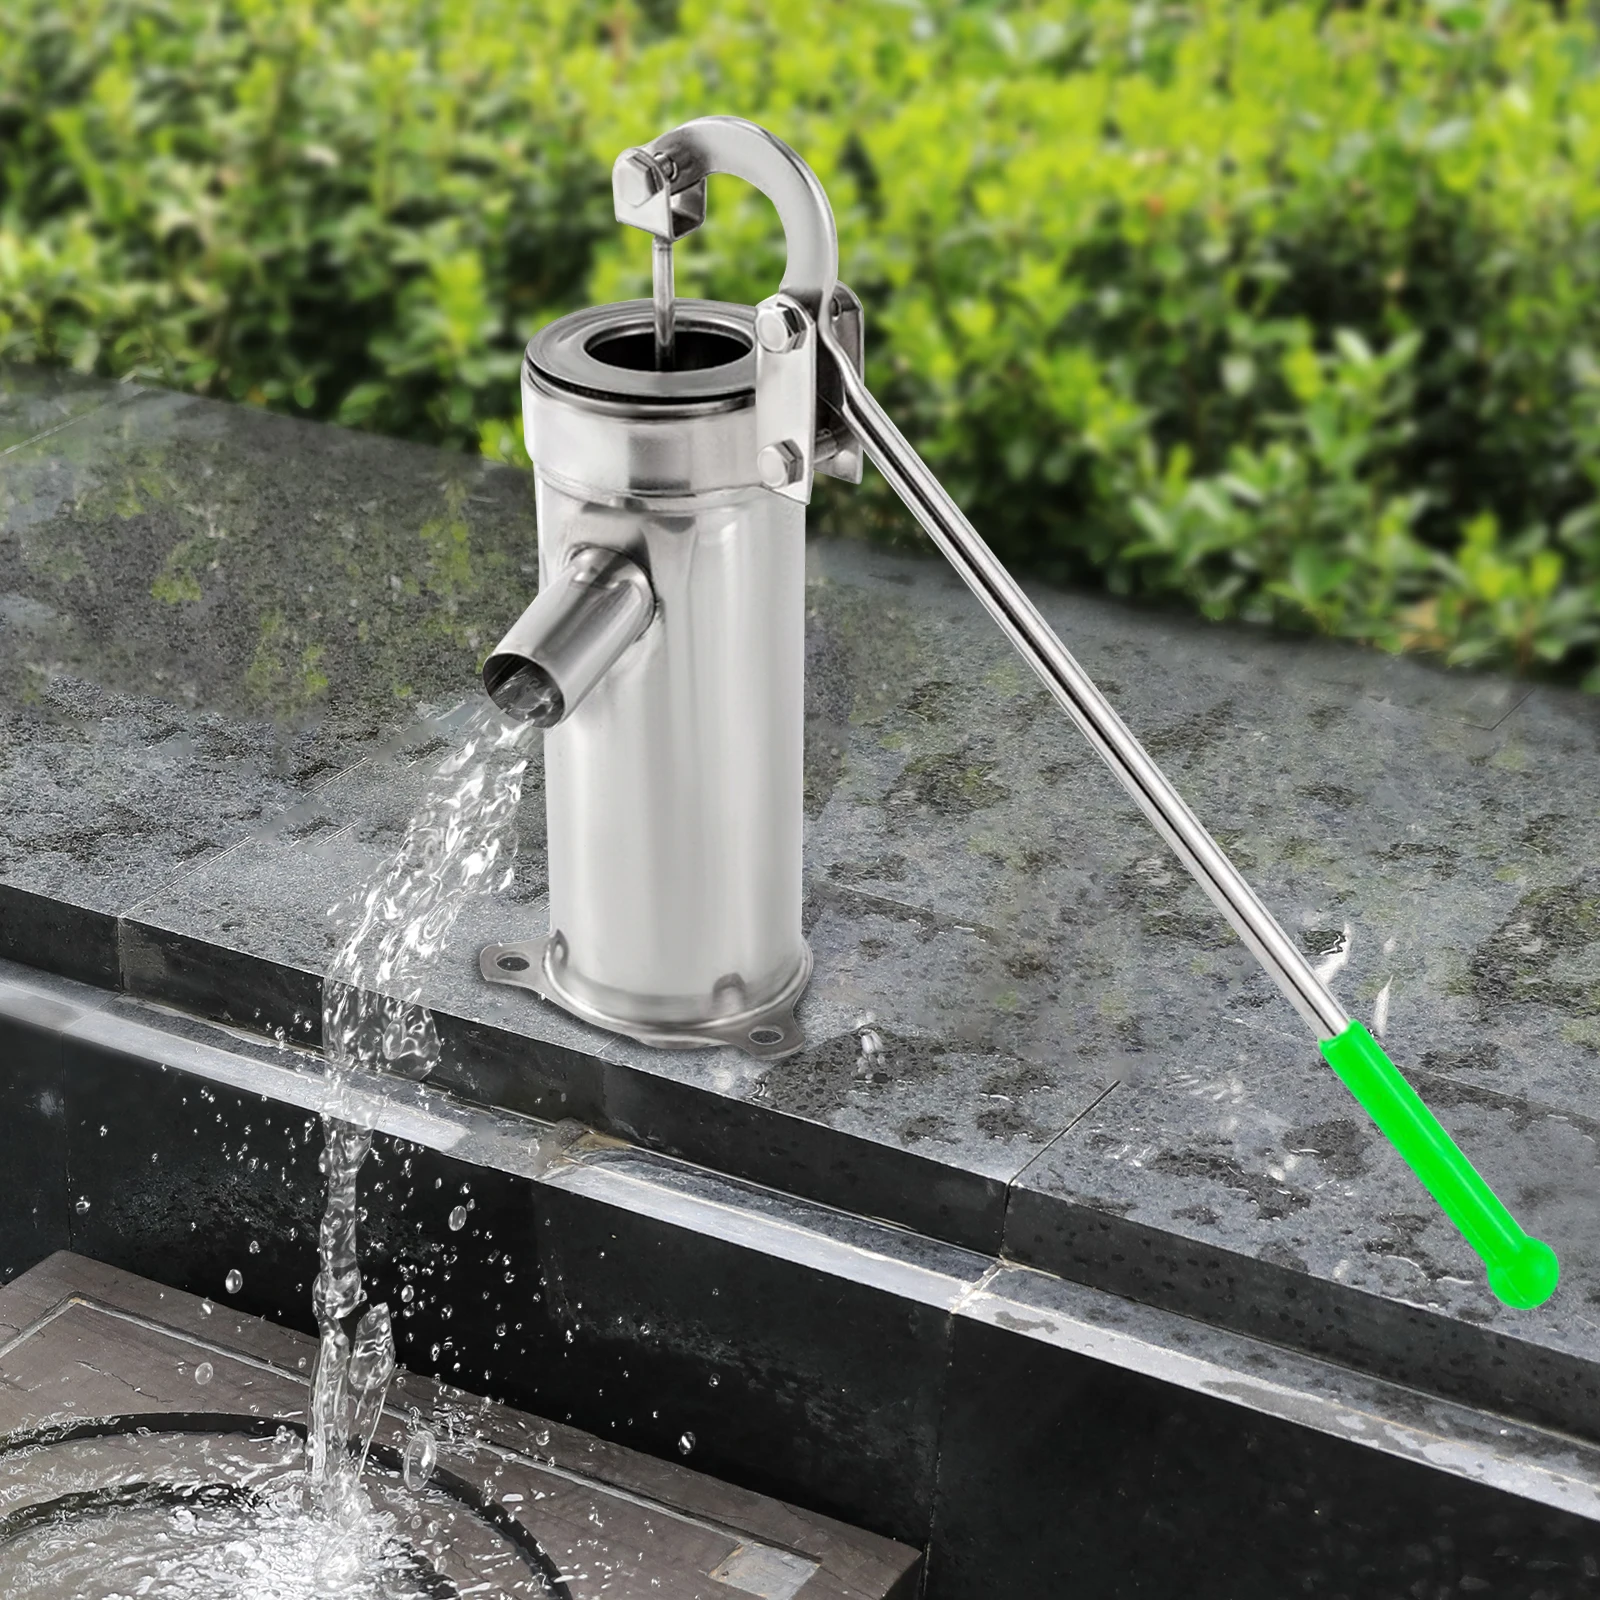 

Domestic Hand Well Pump Manual Deep Water Jet Pump Stainless Steel Handheld Shake Suction Pump for Home Garden Yard Groundwater